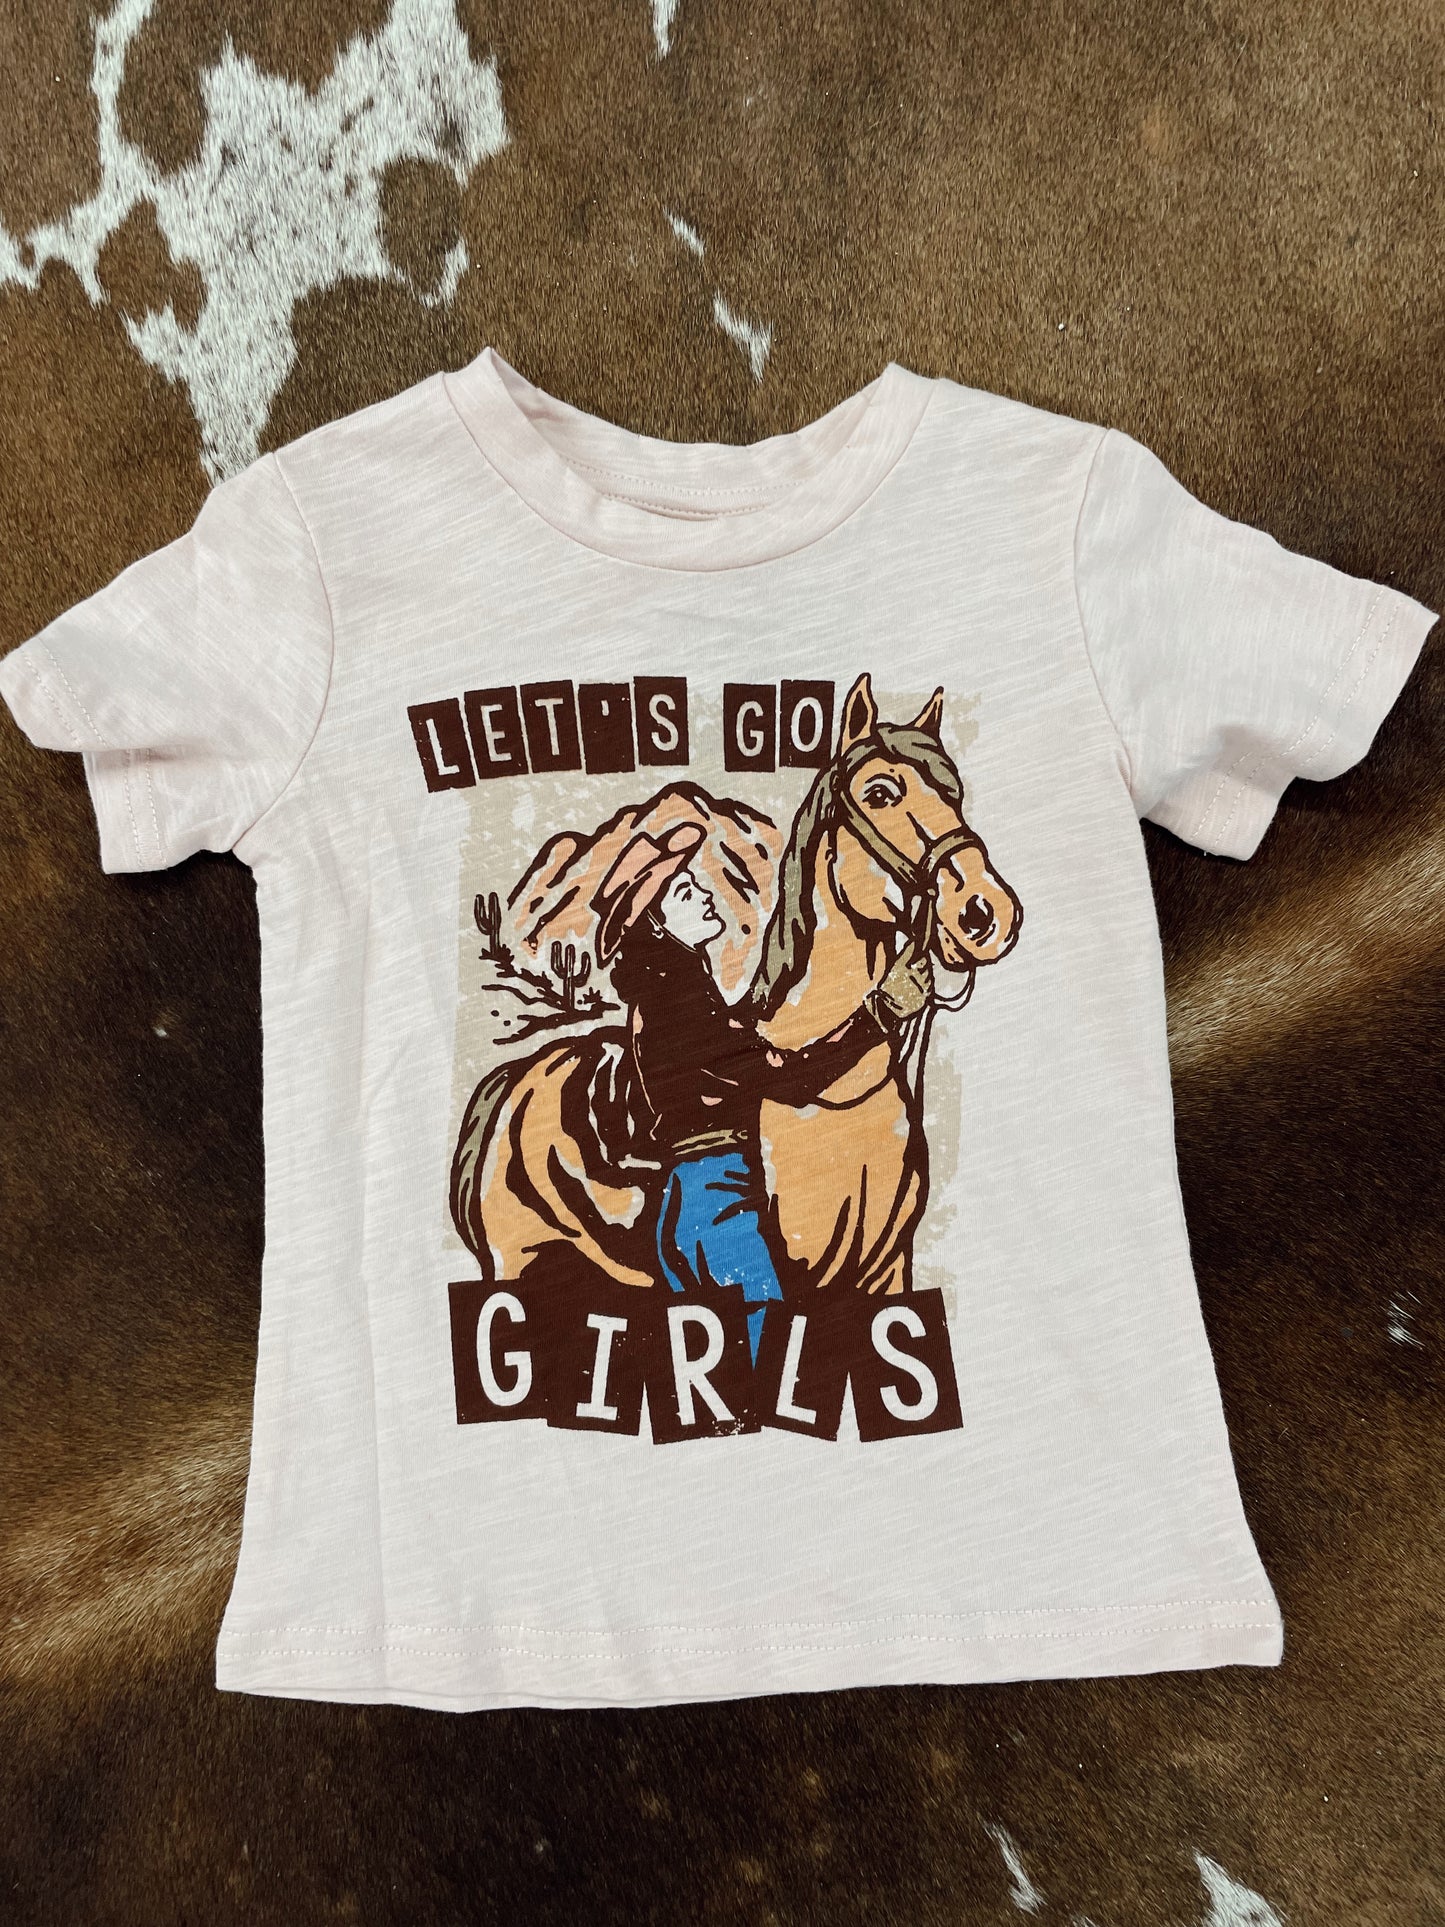 The Let's Go Cowgirls Graphic Tee